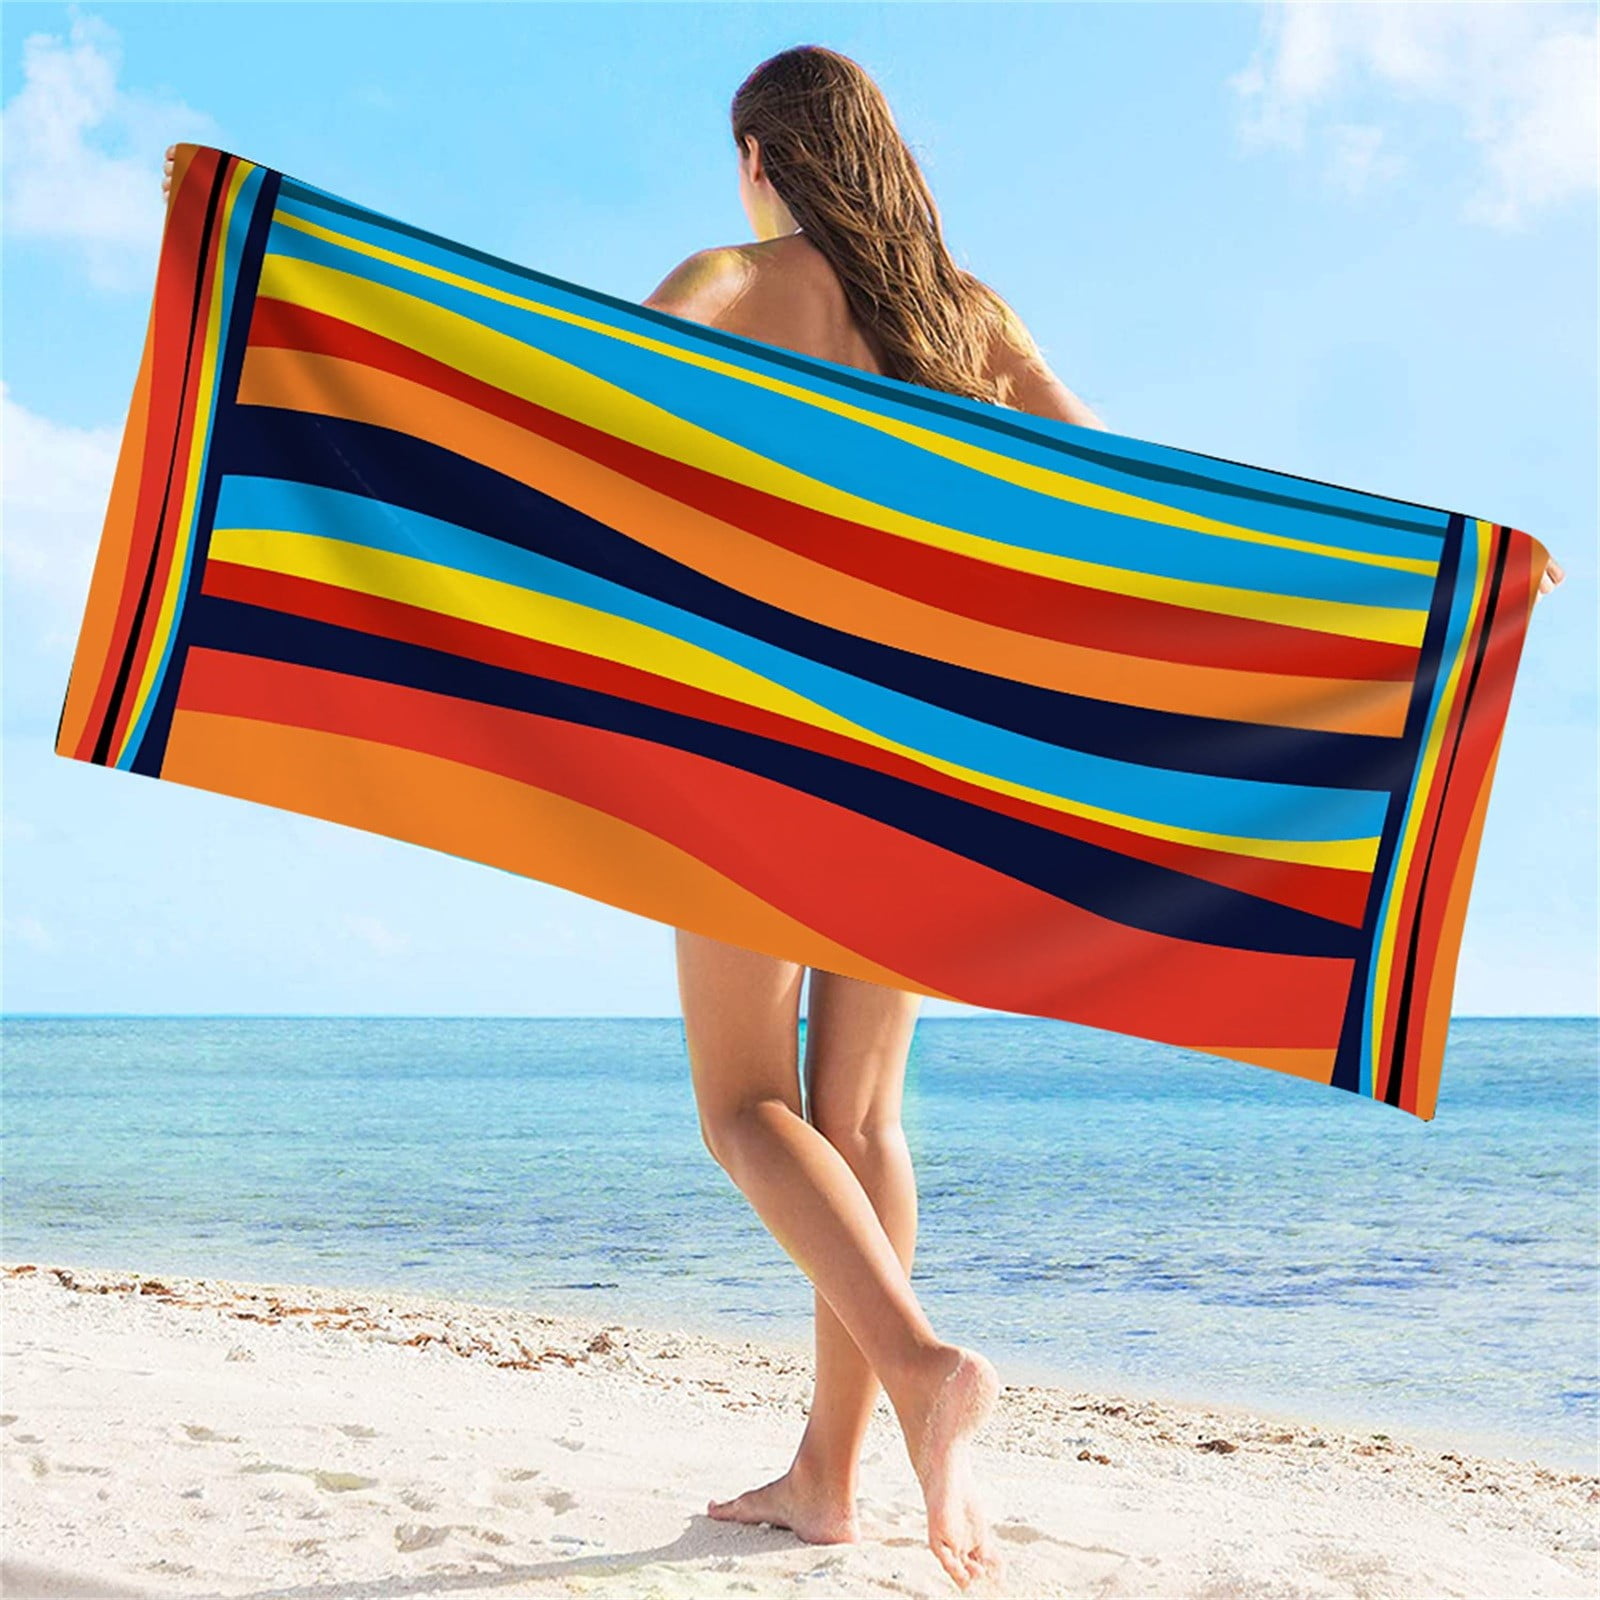 Rkstn Bath Towels Quick Dry Sand Free Compact Lightweight Colorful Microfiber Beach Towel